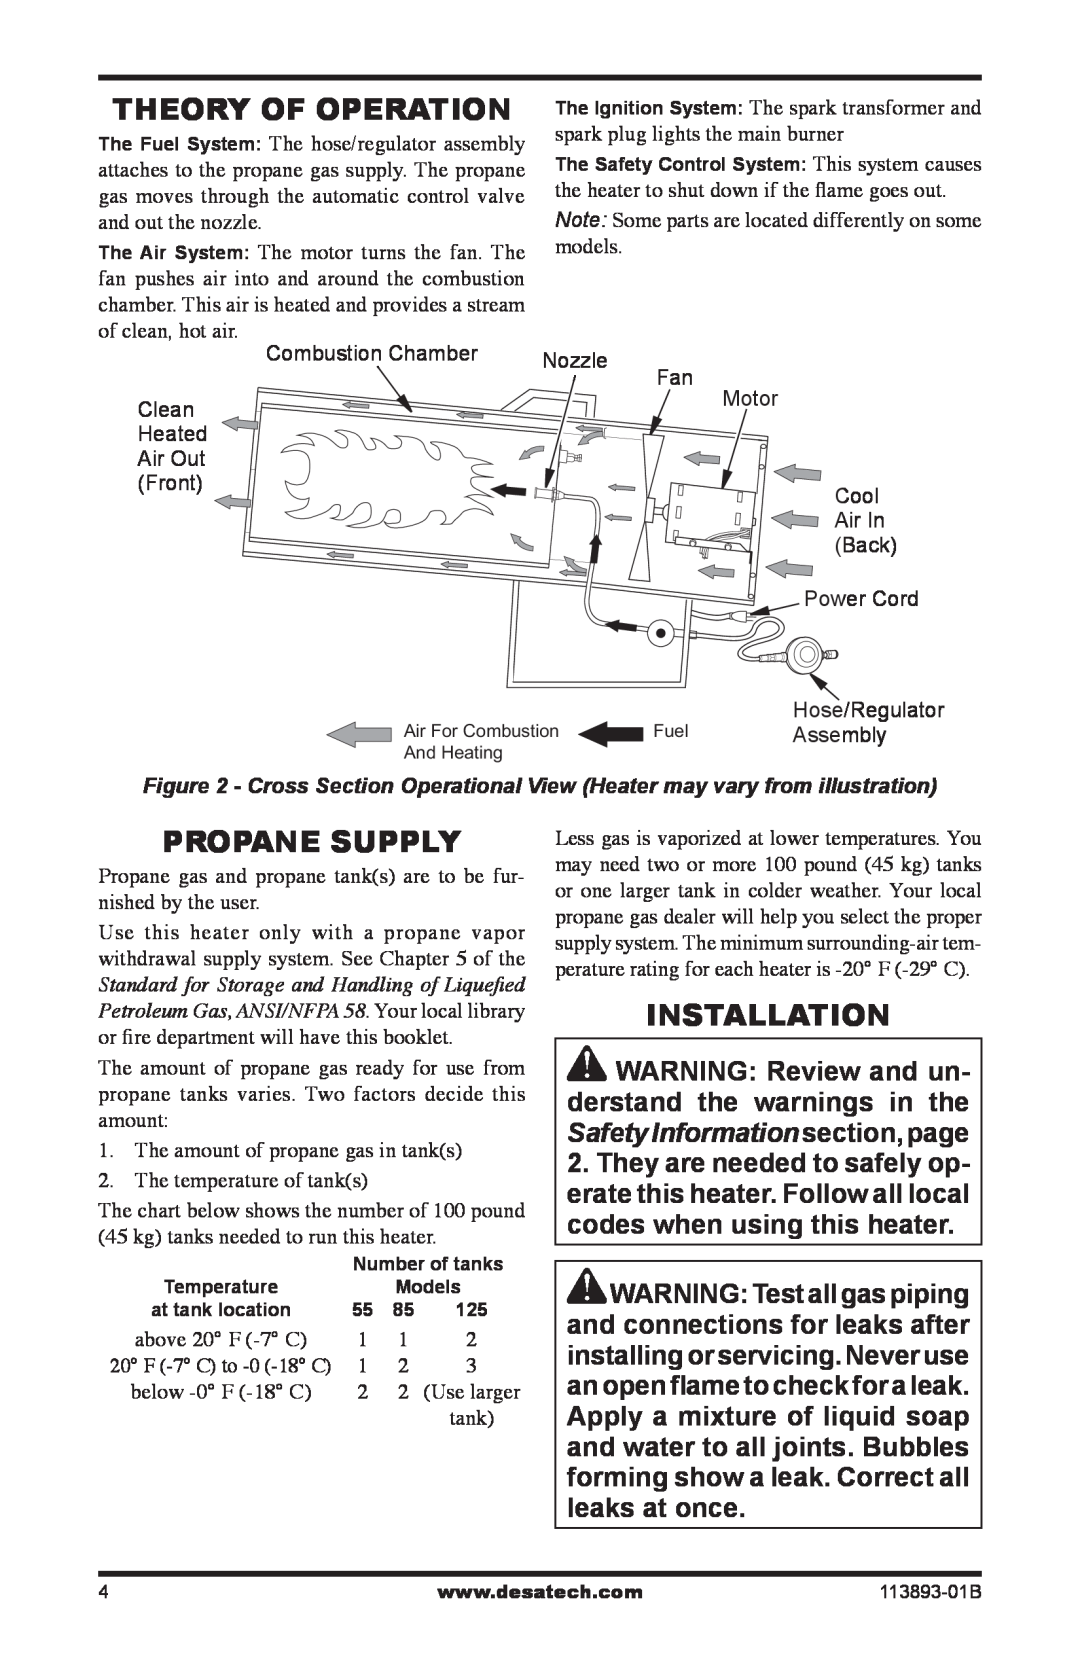 Desa Air Conditioner owner manual Propane Supply, Installation, Theory Of Operation 